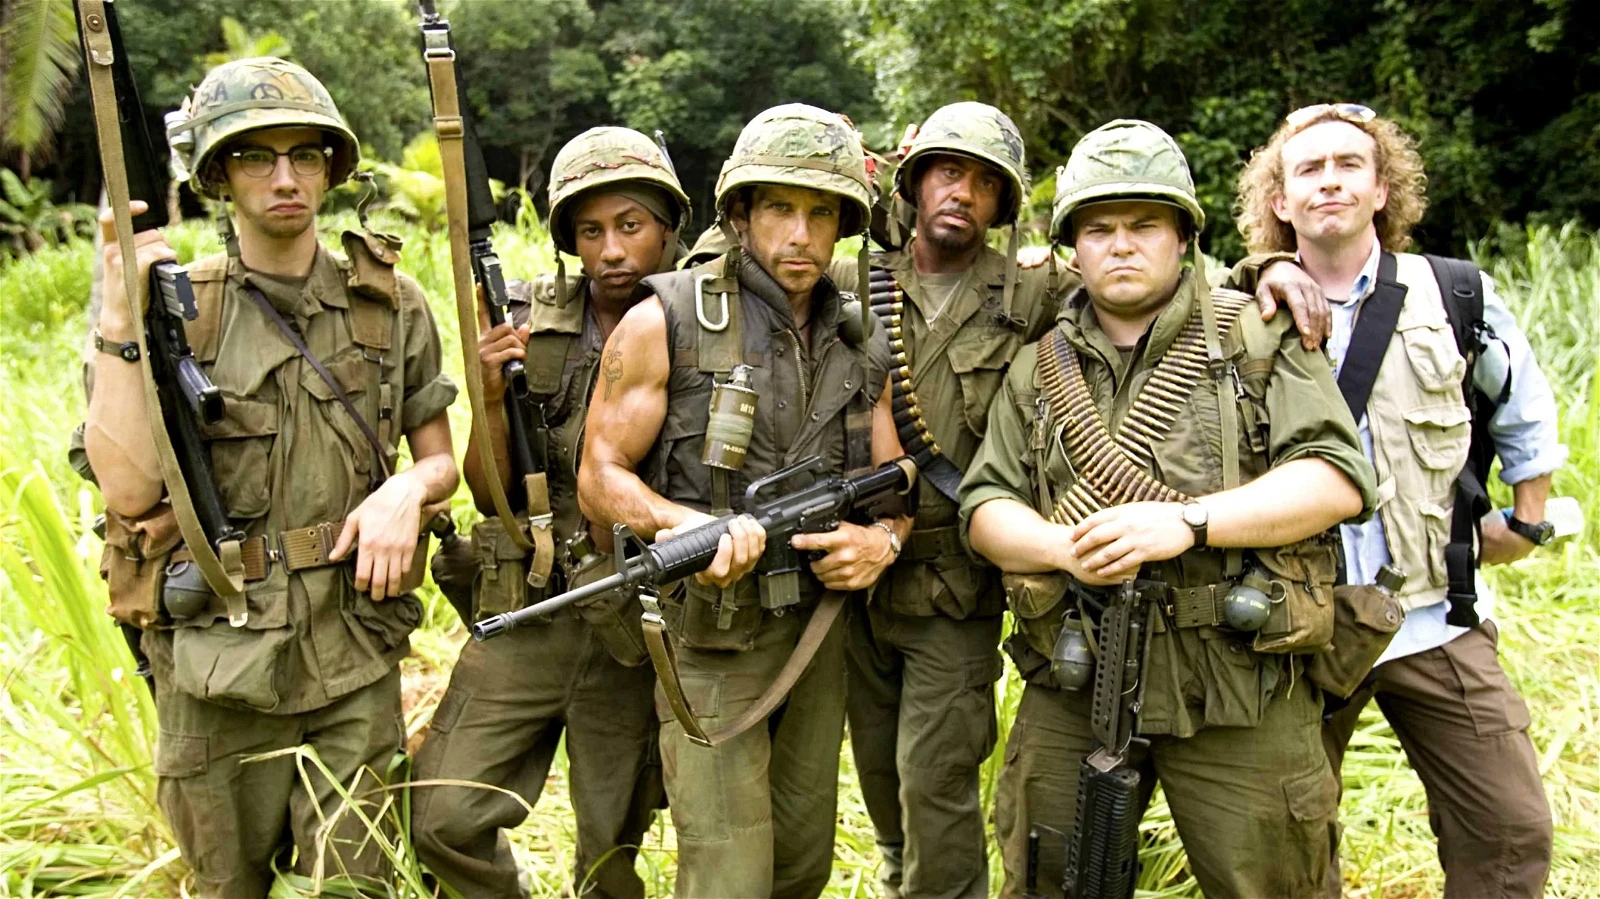 Tropic Thunder was an underrated comedy